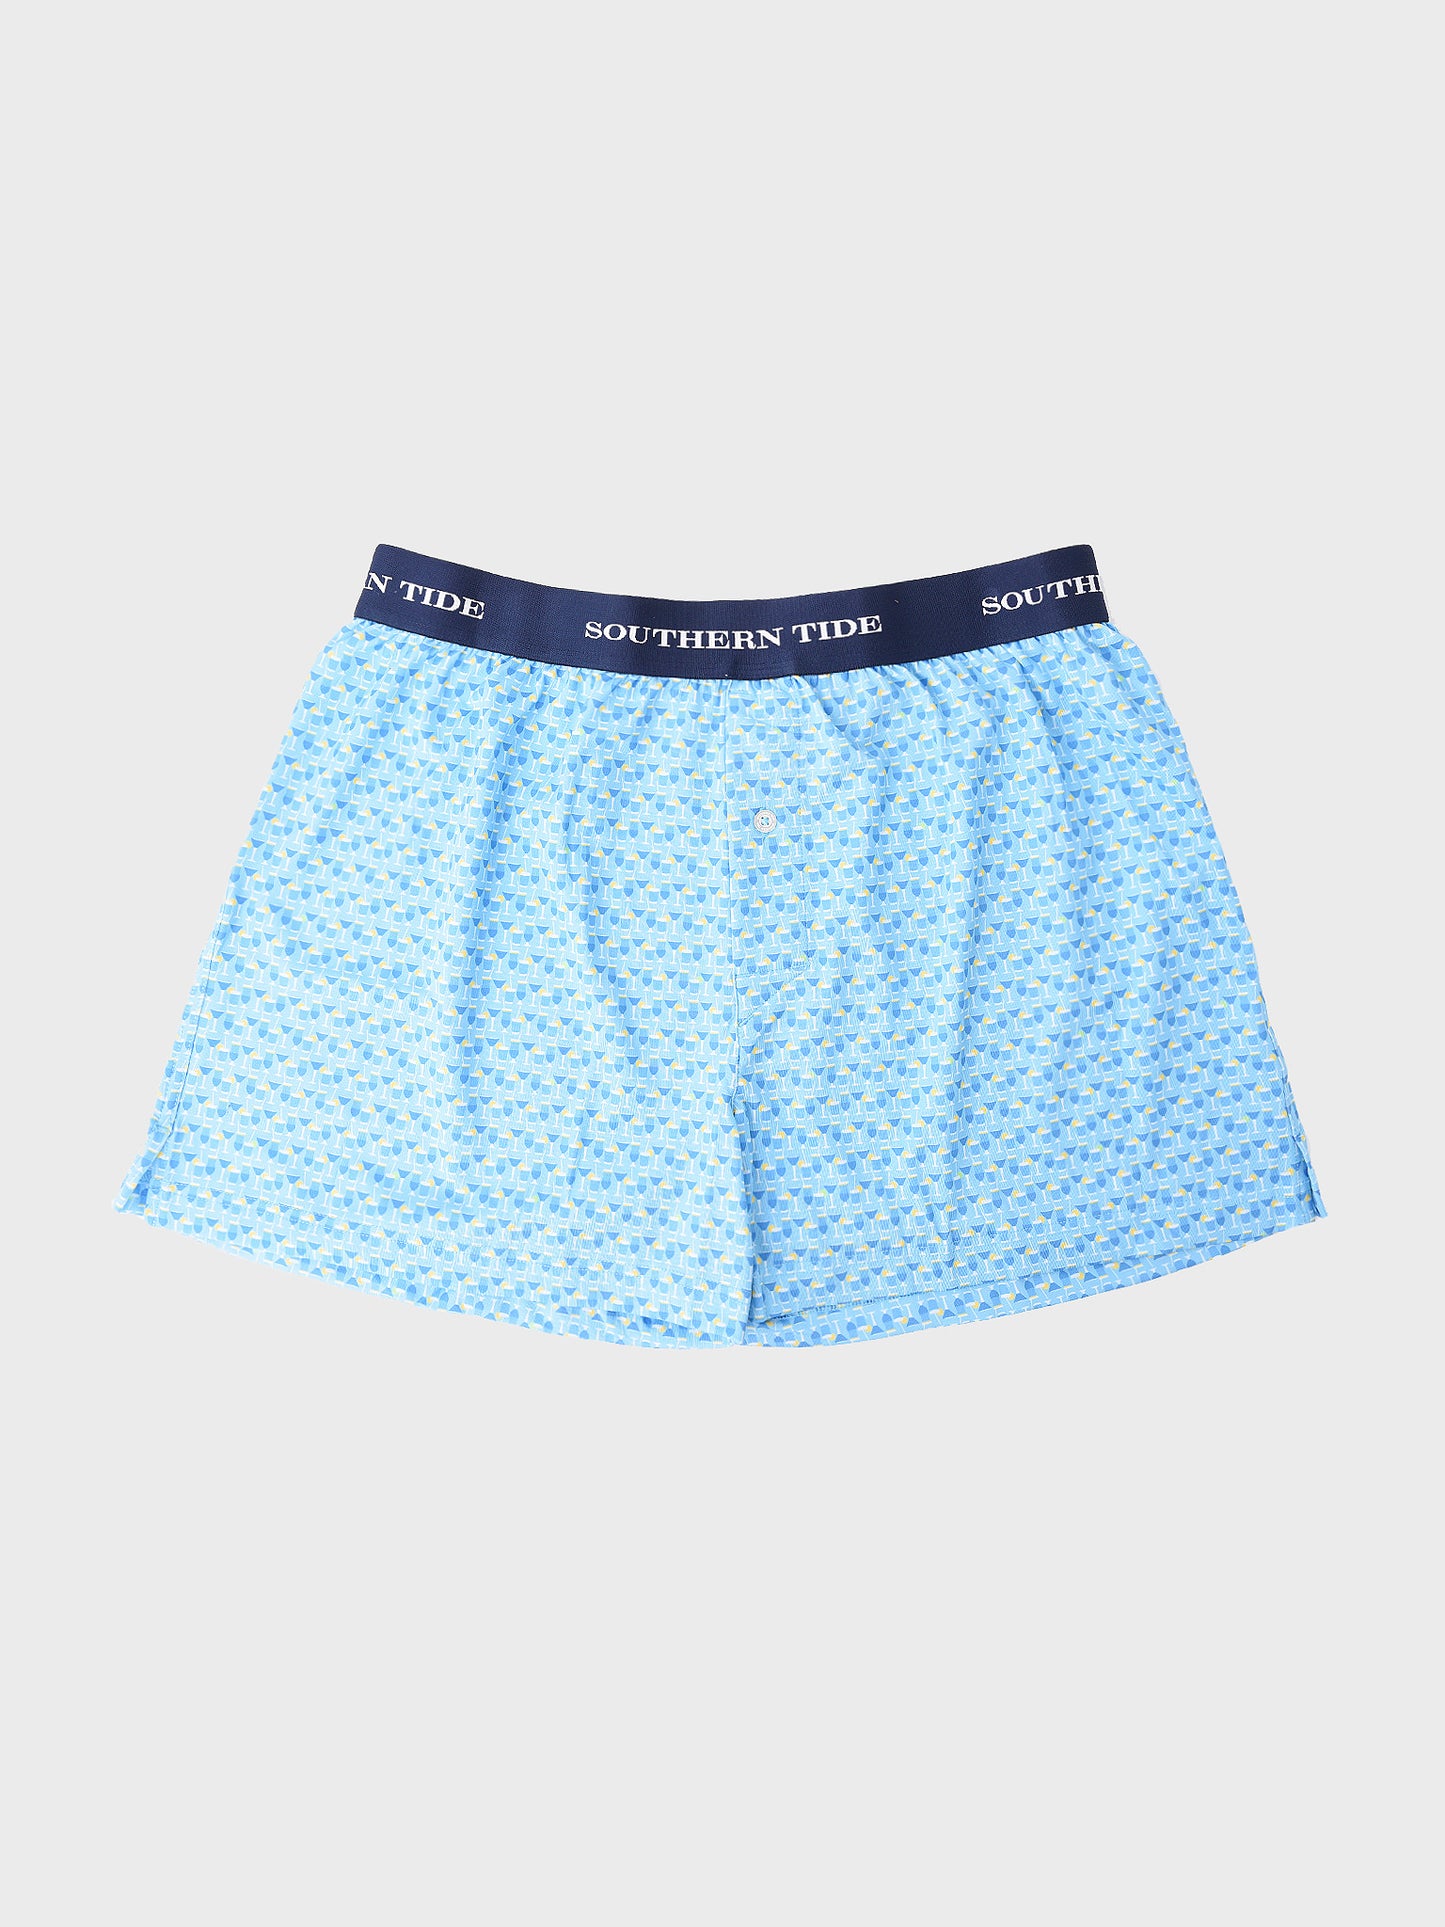 Southern Tide Men's Drink of the Day Performance Boxer Short